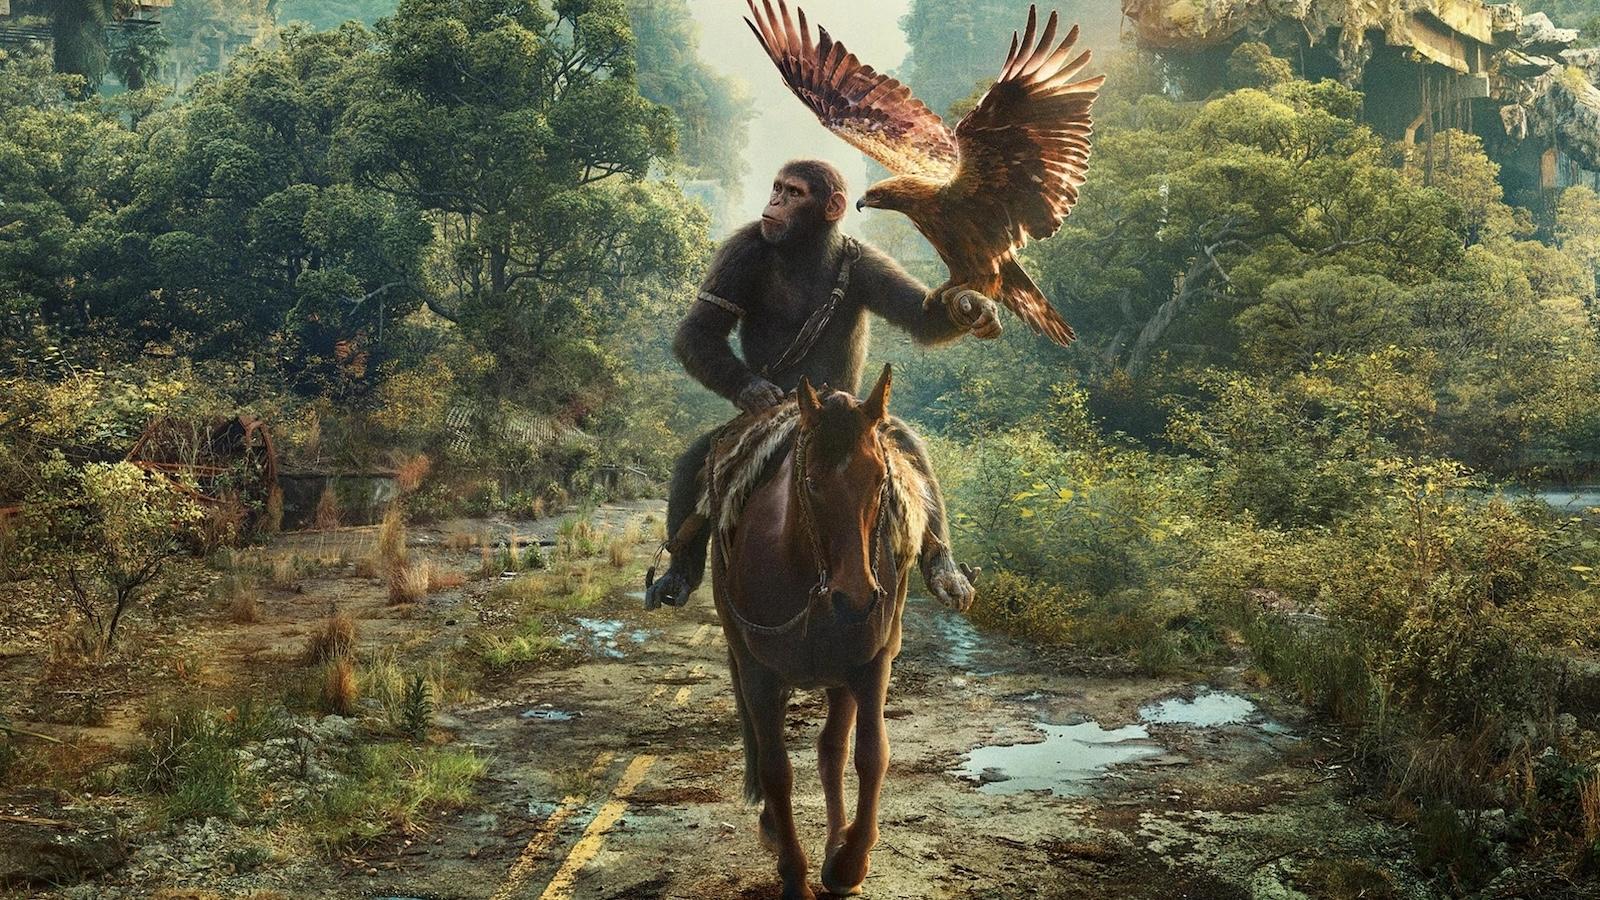 The poster for Kingdom of the Planet of the Apes